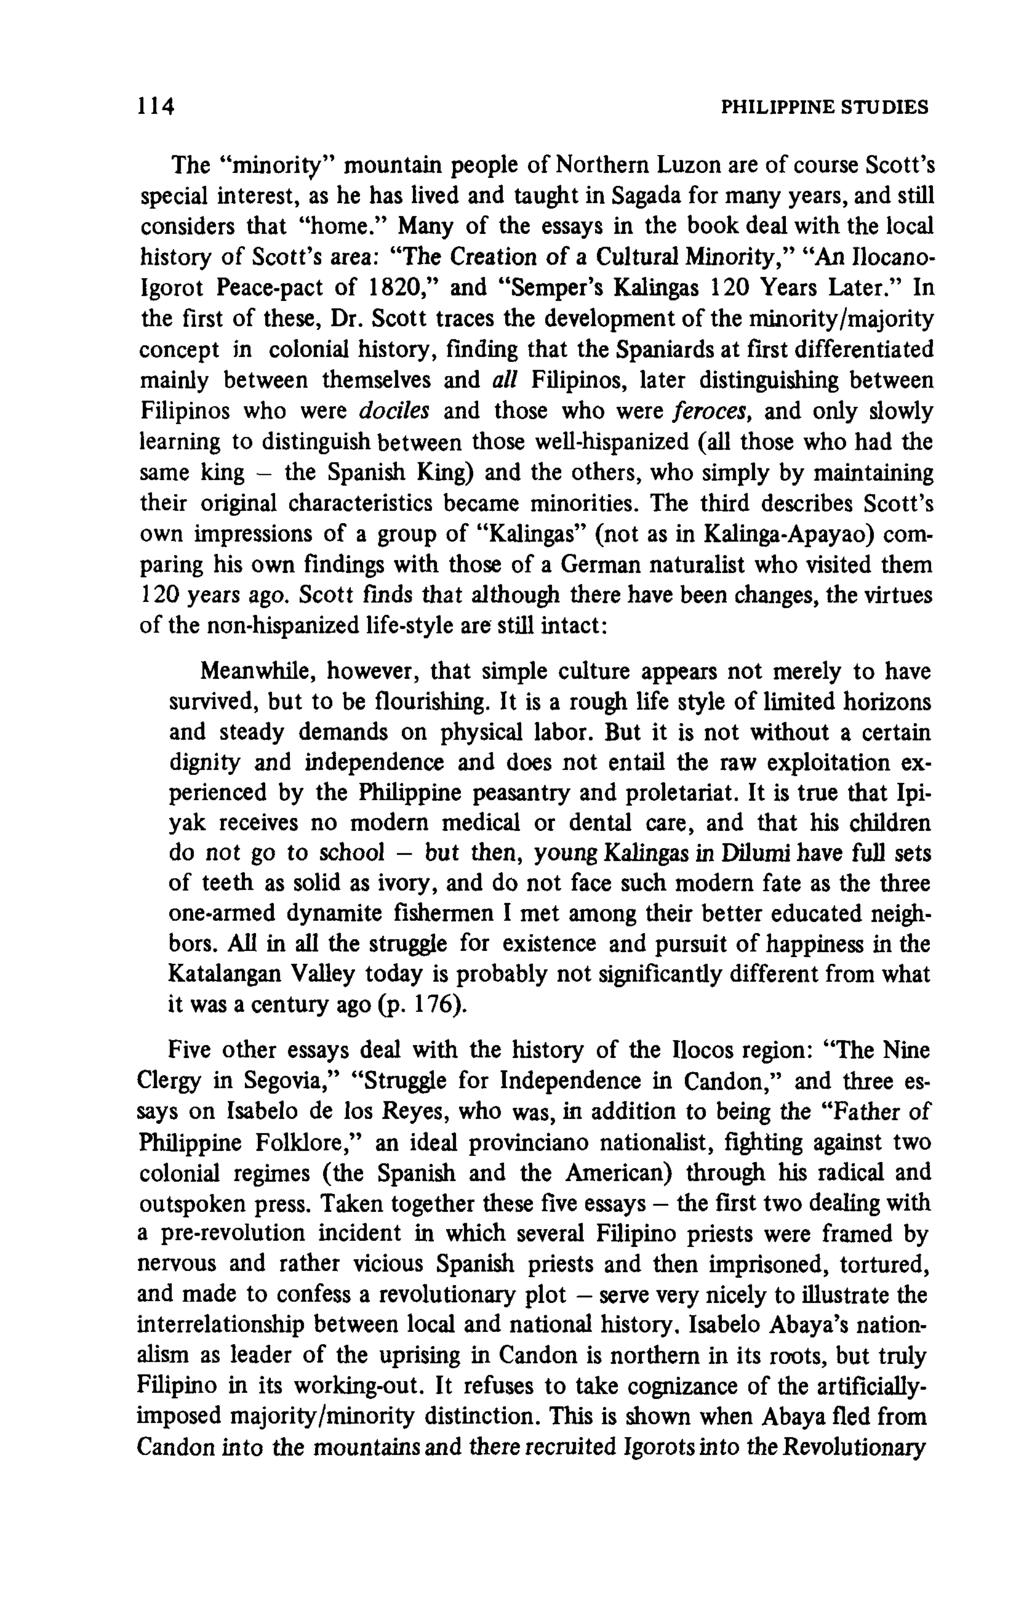 114 PHILIPPINE STUDIES The "minority" mountain people of Northern Luzon are of course Scott's special interest, as he has lived and taught in Sagada for many years, and still considers that "home.